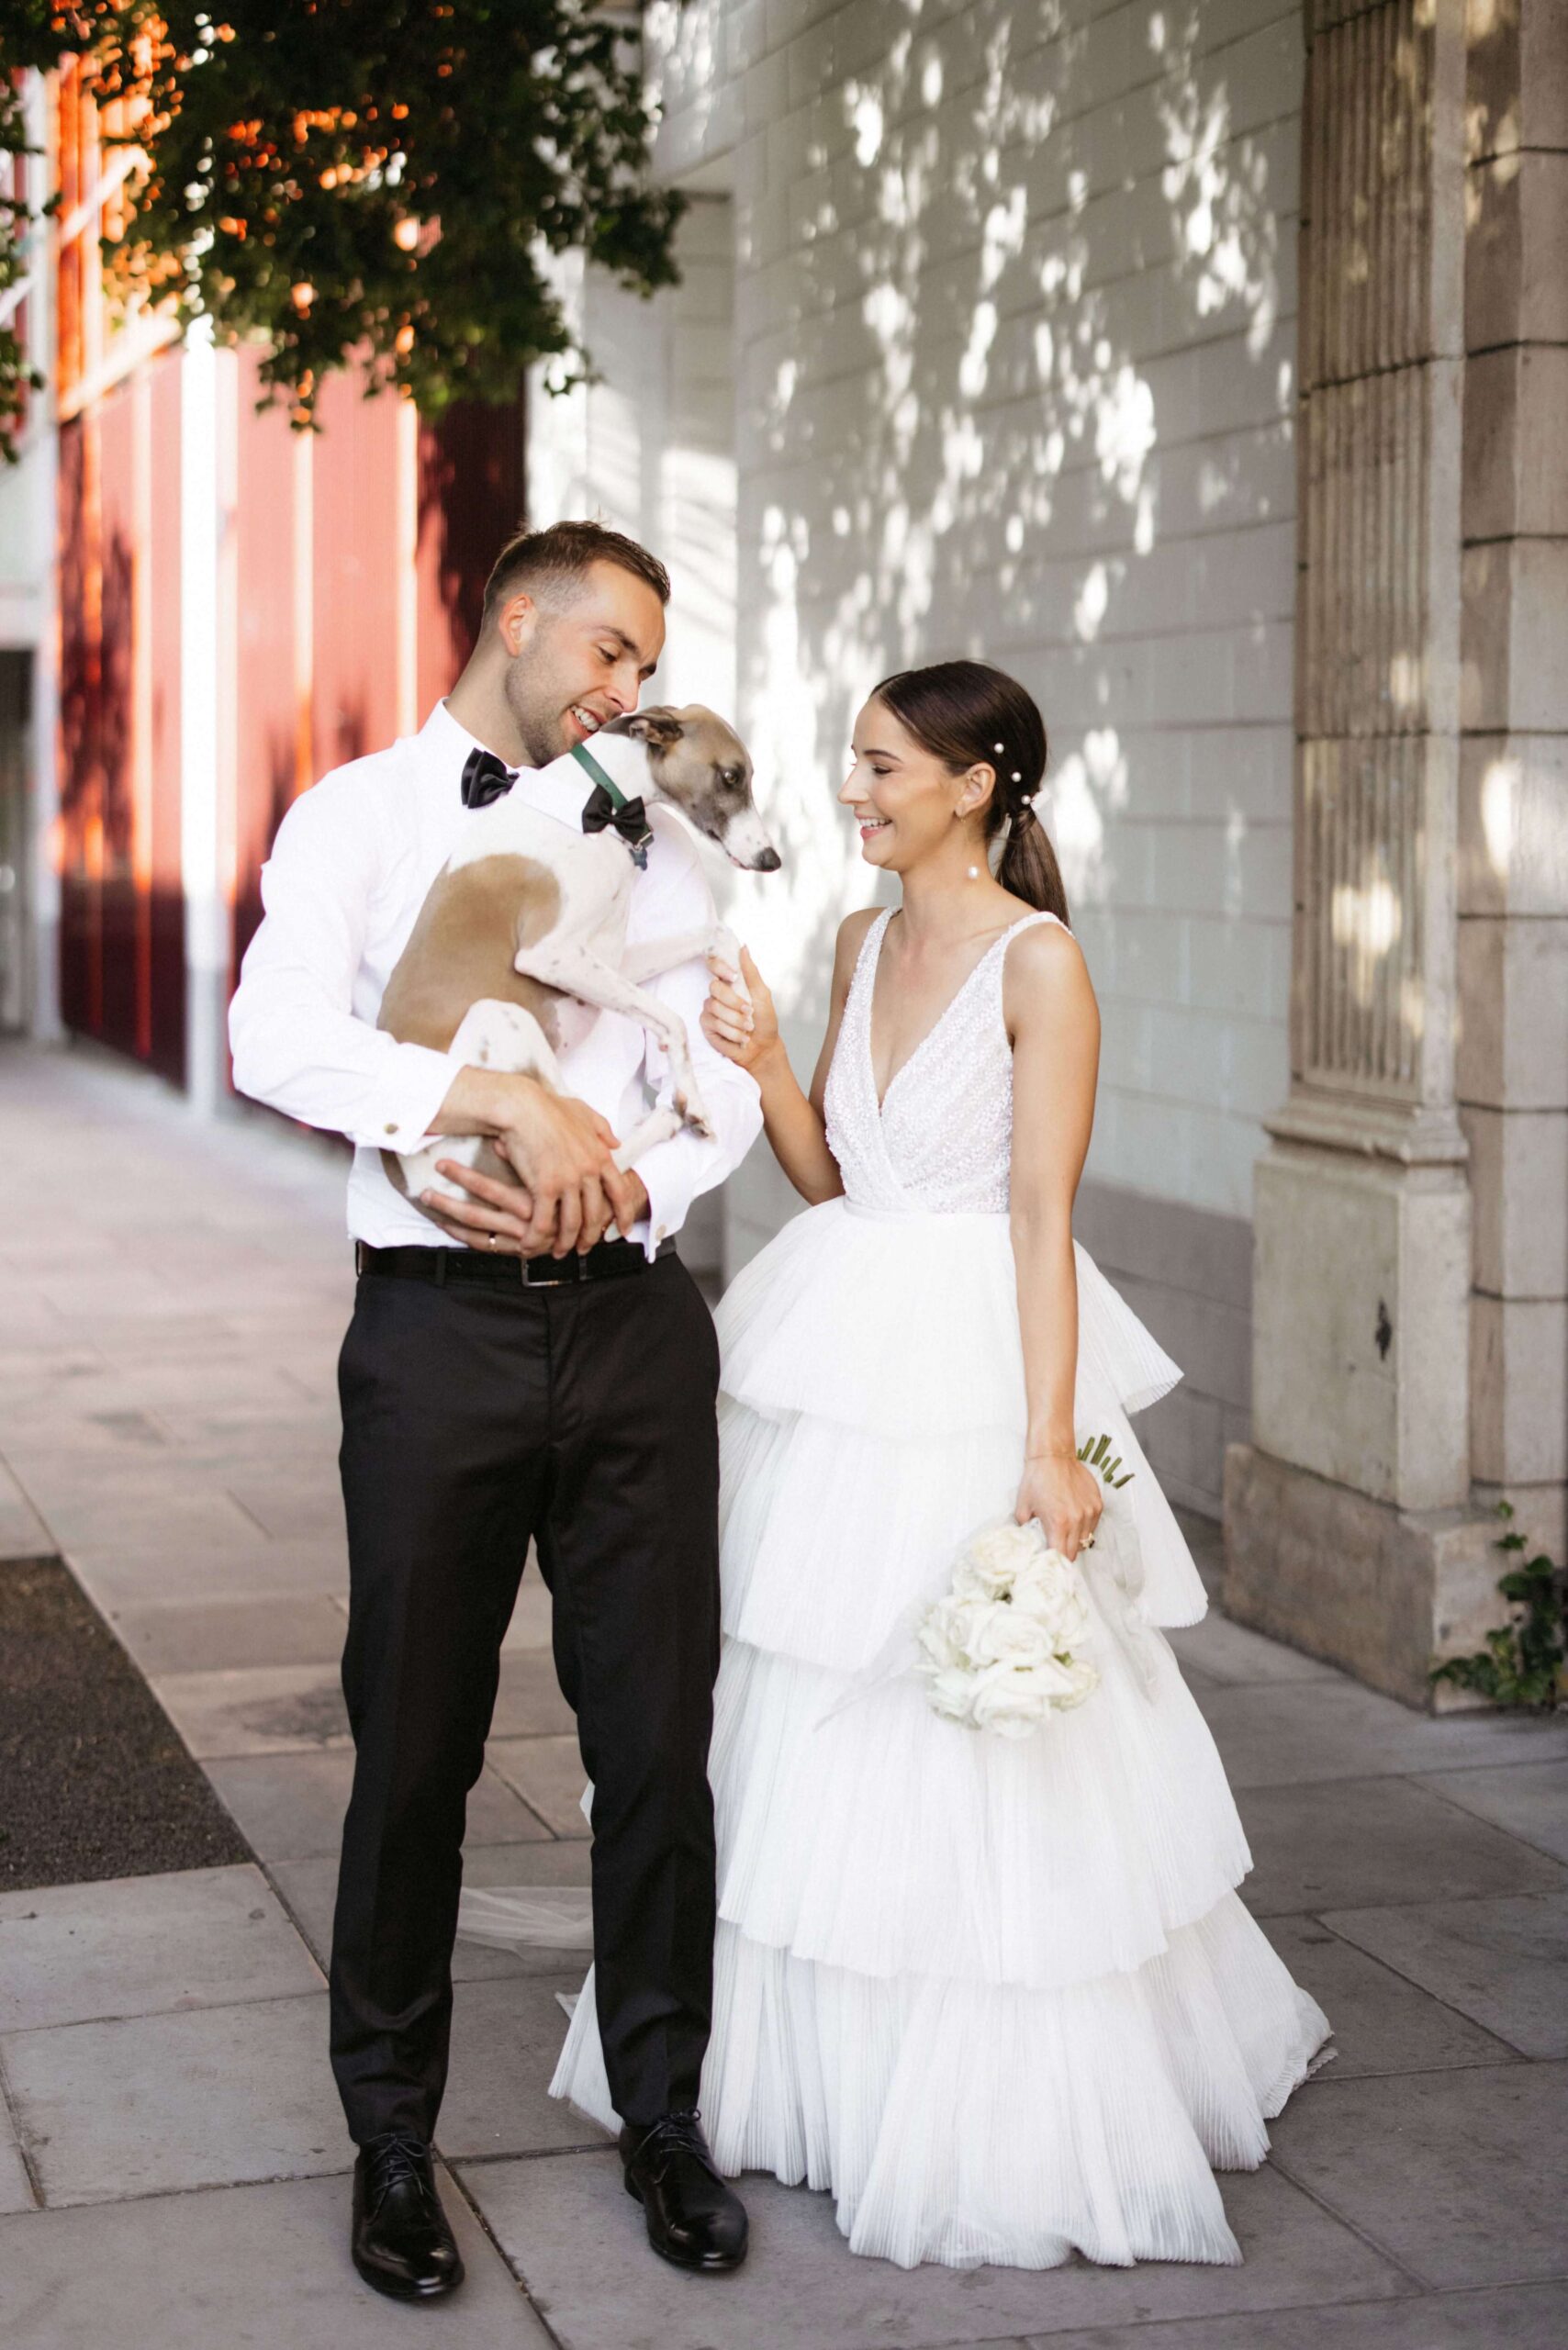 Bethany and Daniel holding a dog wearing a bow tie